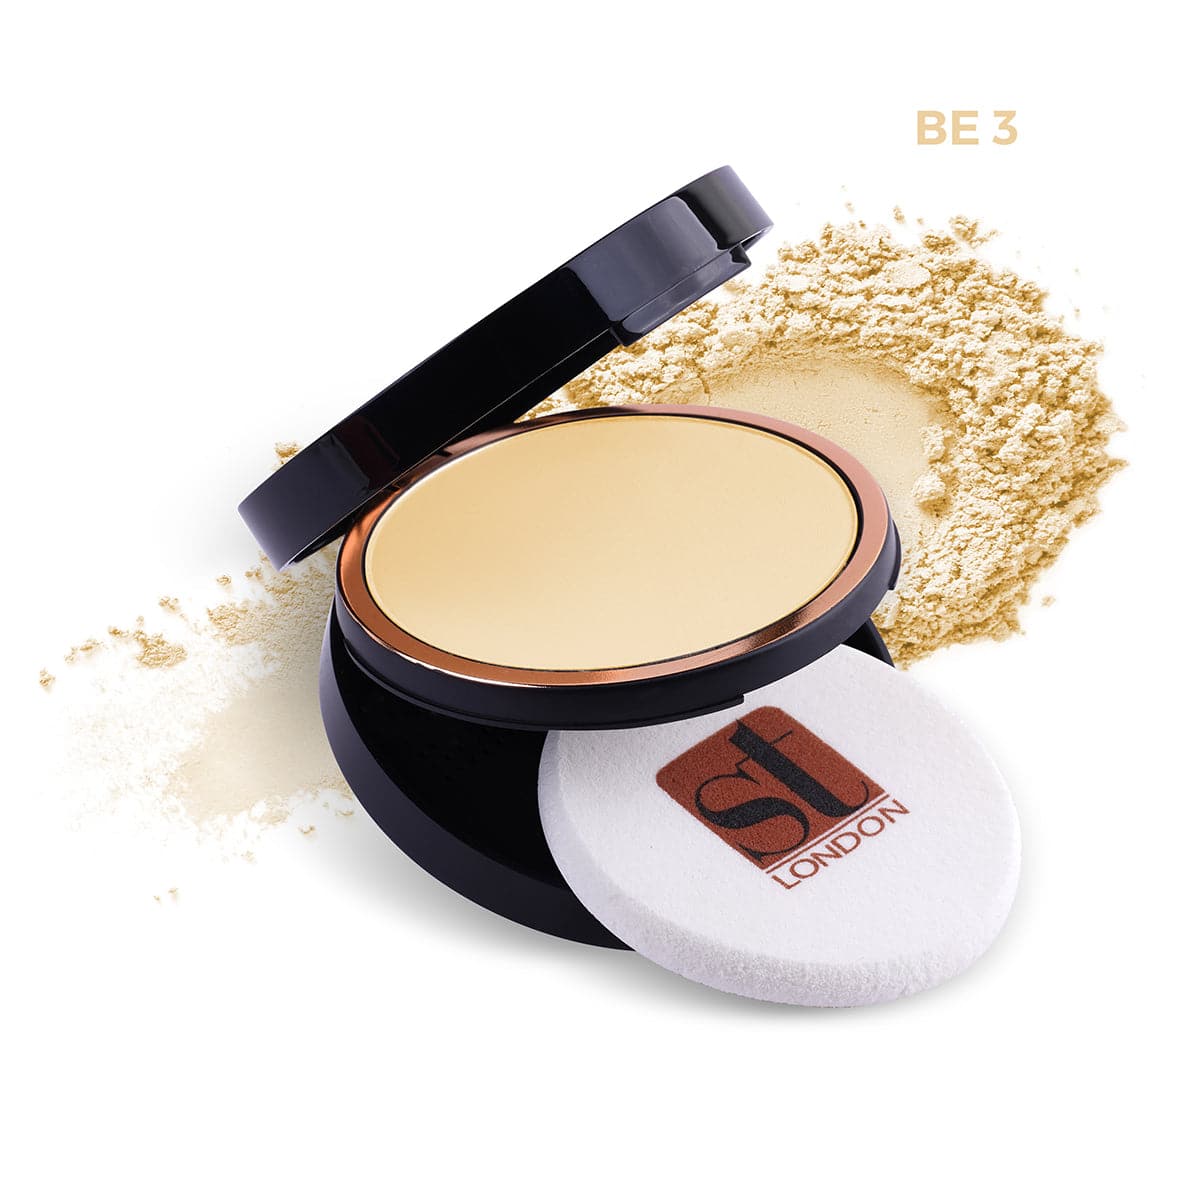 ST London Dual Wet & Dry Compact Powder - Be 3 - Premium Health & Beauty from St London - Just Rs 2330.00! Shop now at Cozmetica